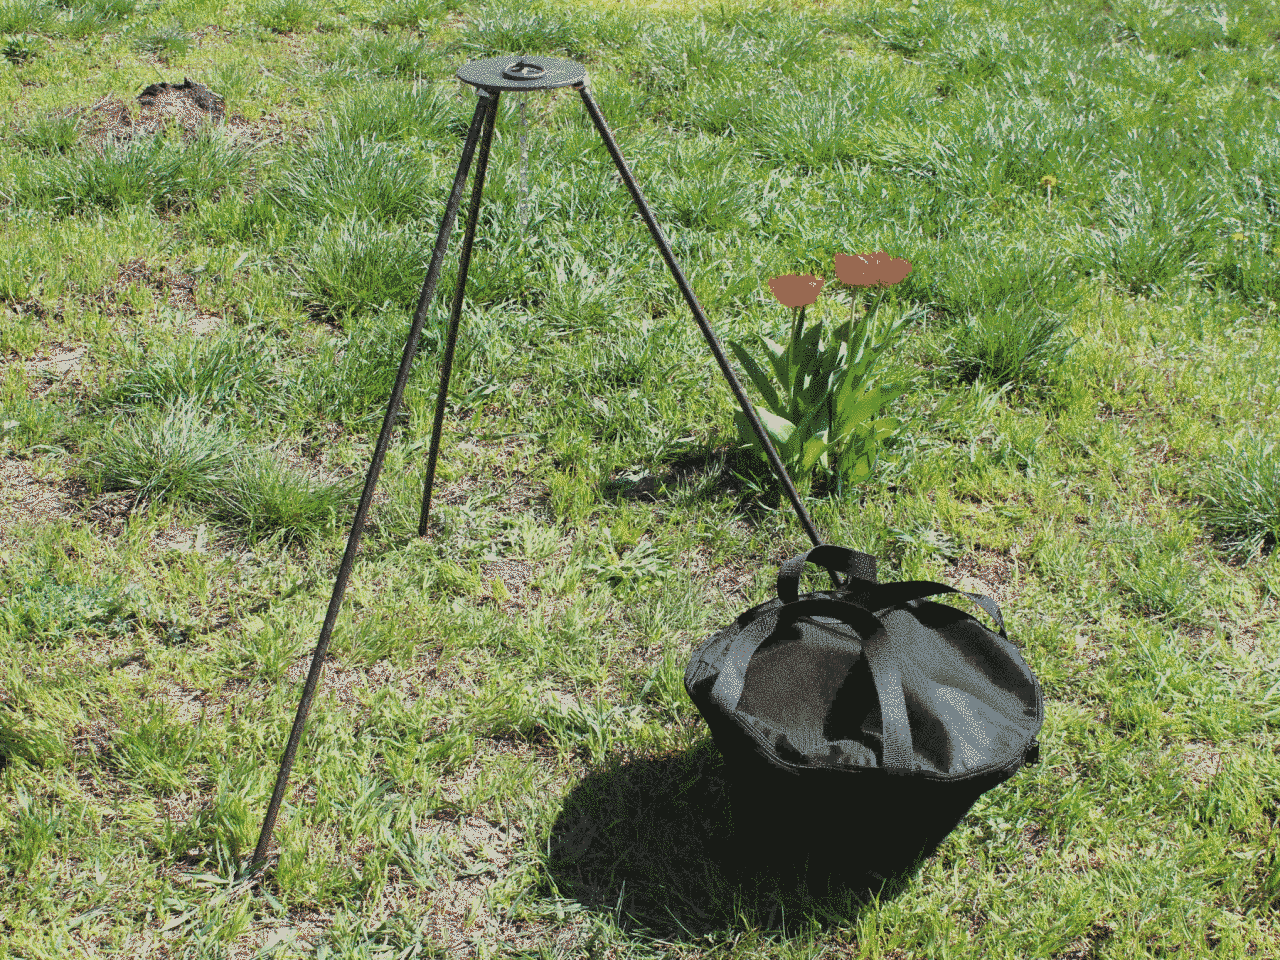 Cast iron asian cauldron WITH A LID 4 L with tripod and a bag